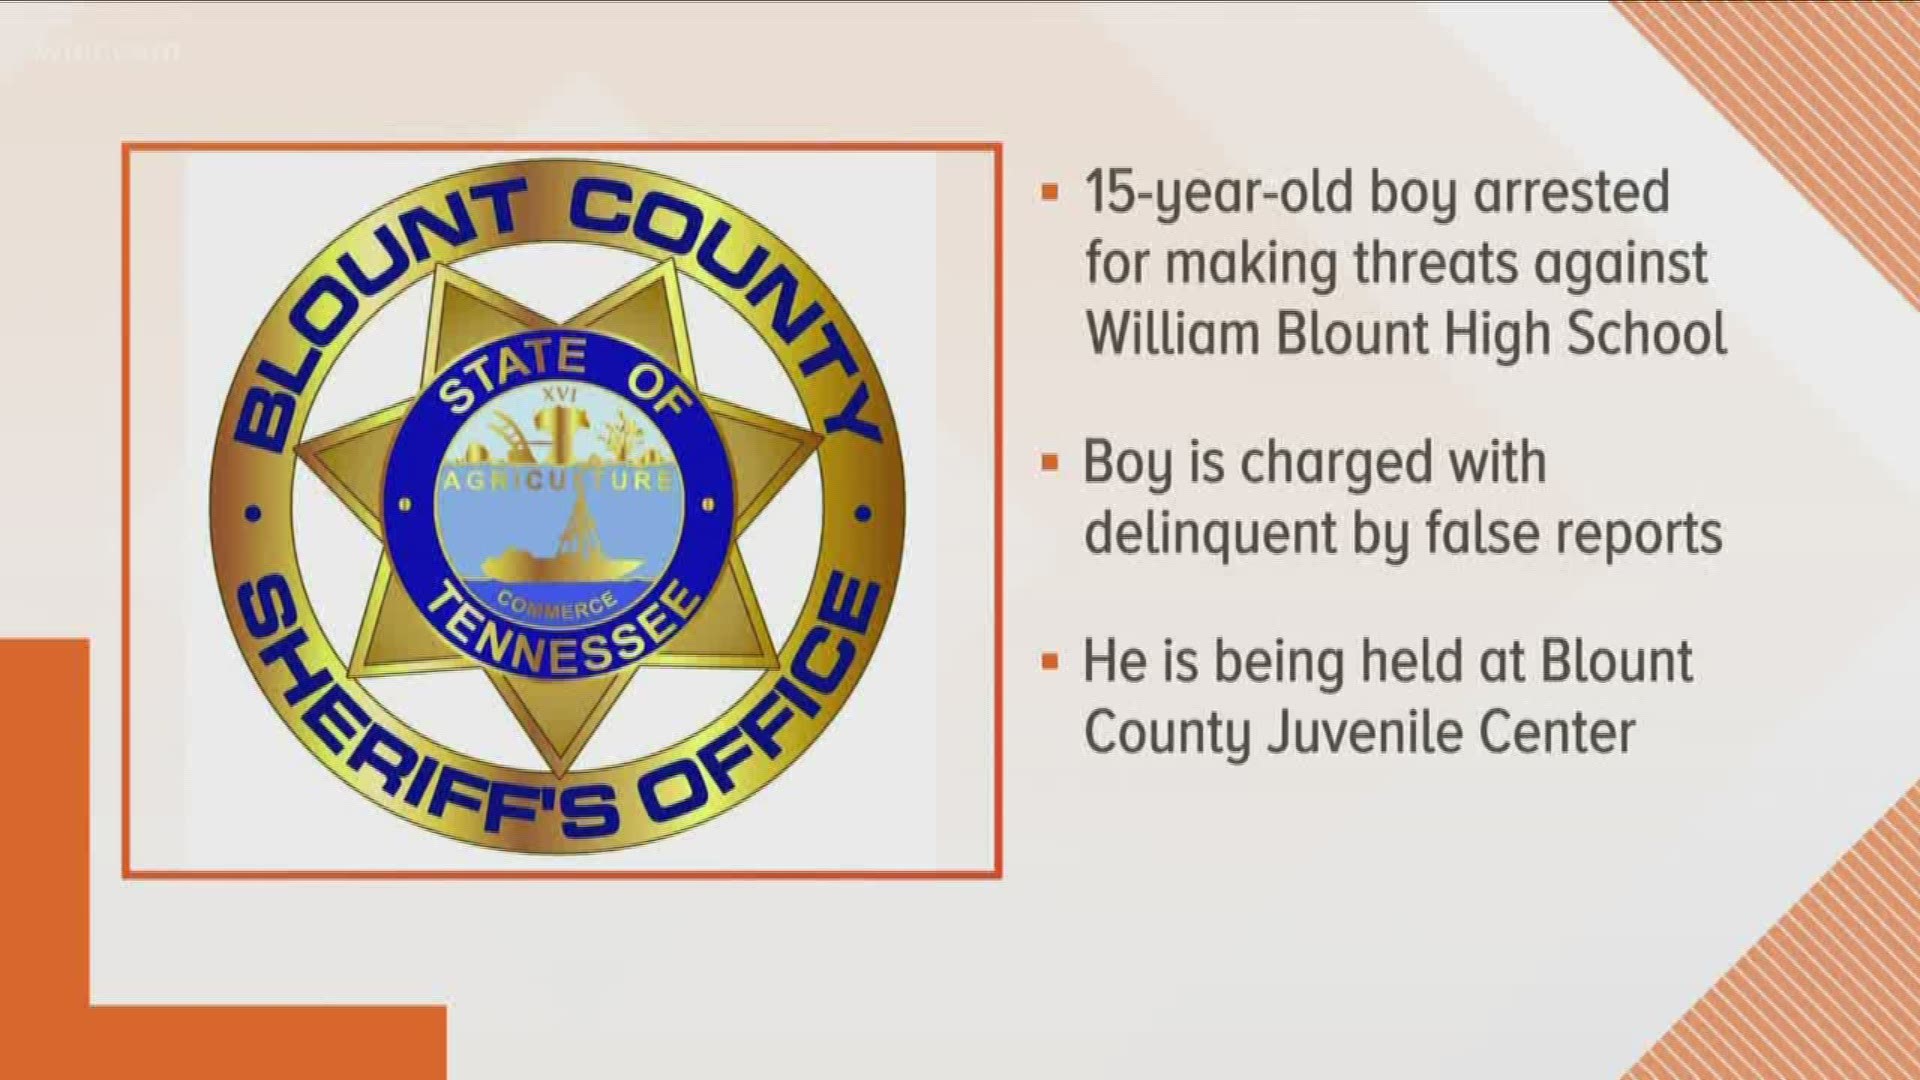 Blount County Sheriff James Lee Berrong said the 15-year-old William Blount High School student made threats against the school. The sheriff said the boy is charged with making a false report.